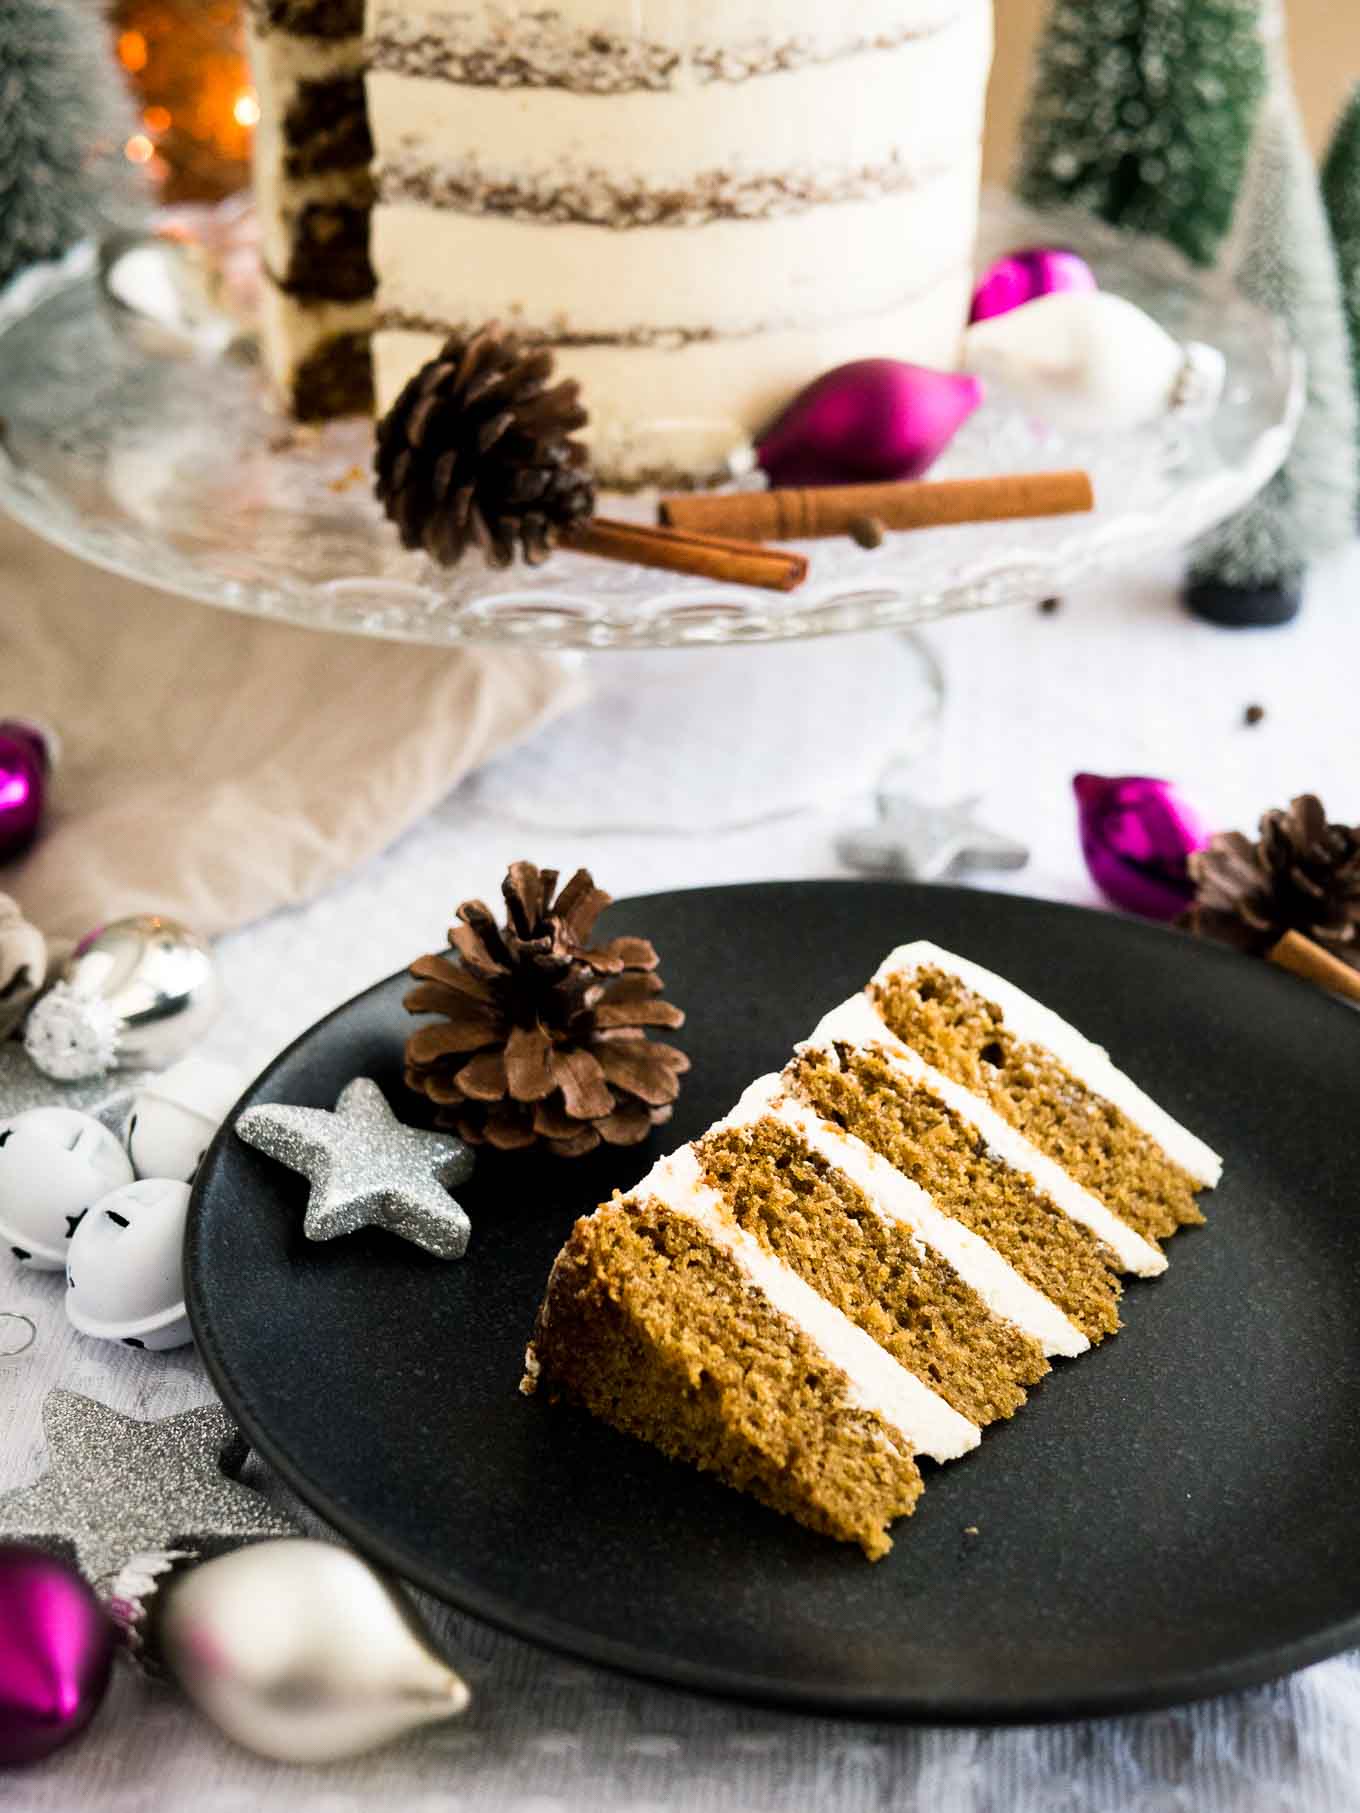 This Gingerbread Cake recipe is perfect for the holidays! A spicy and sweet ginger cake with a delicious Baileys cream cheese frosting.